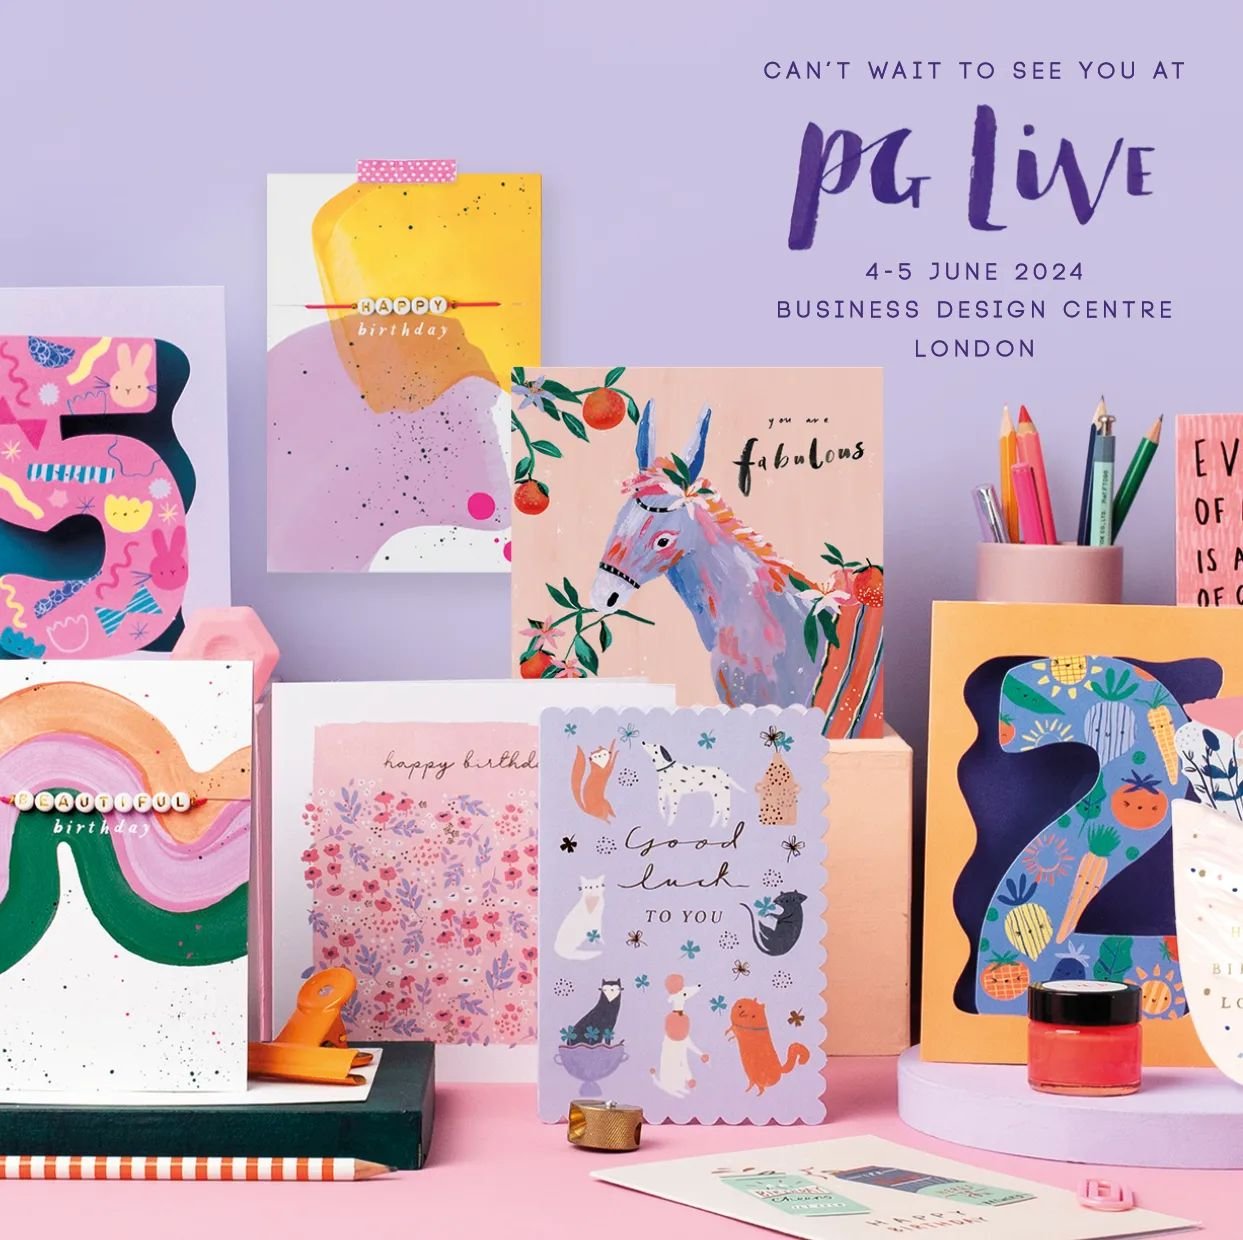 5 weeks until we set up for @pglivelondon !! We'll be on stand 222 💜
.
If you're a lovely trade customer, we can't wait to see you; alternatively get a date in the diary with one of our sales reps who can show you samples of all our new collections 